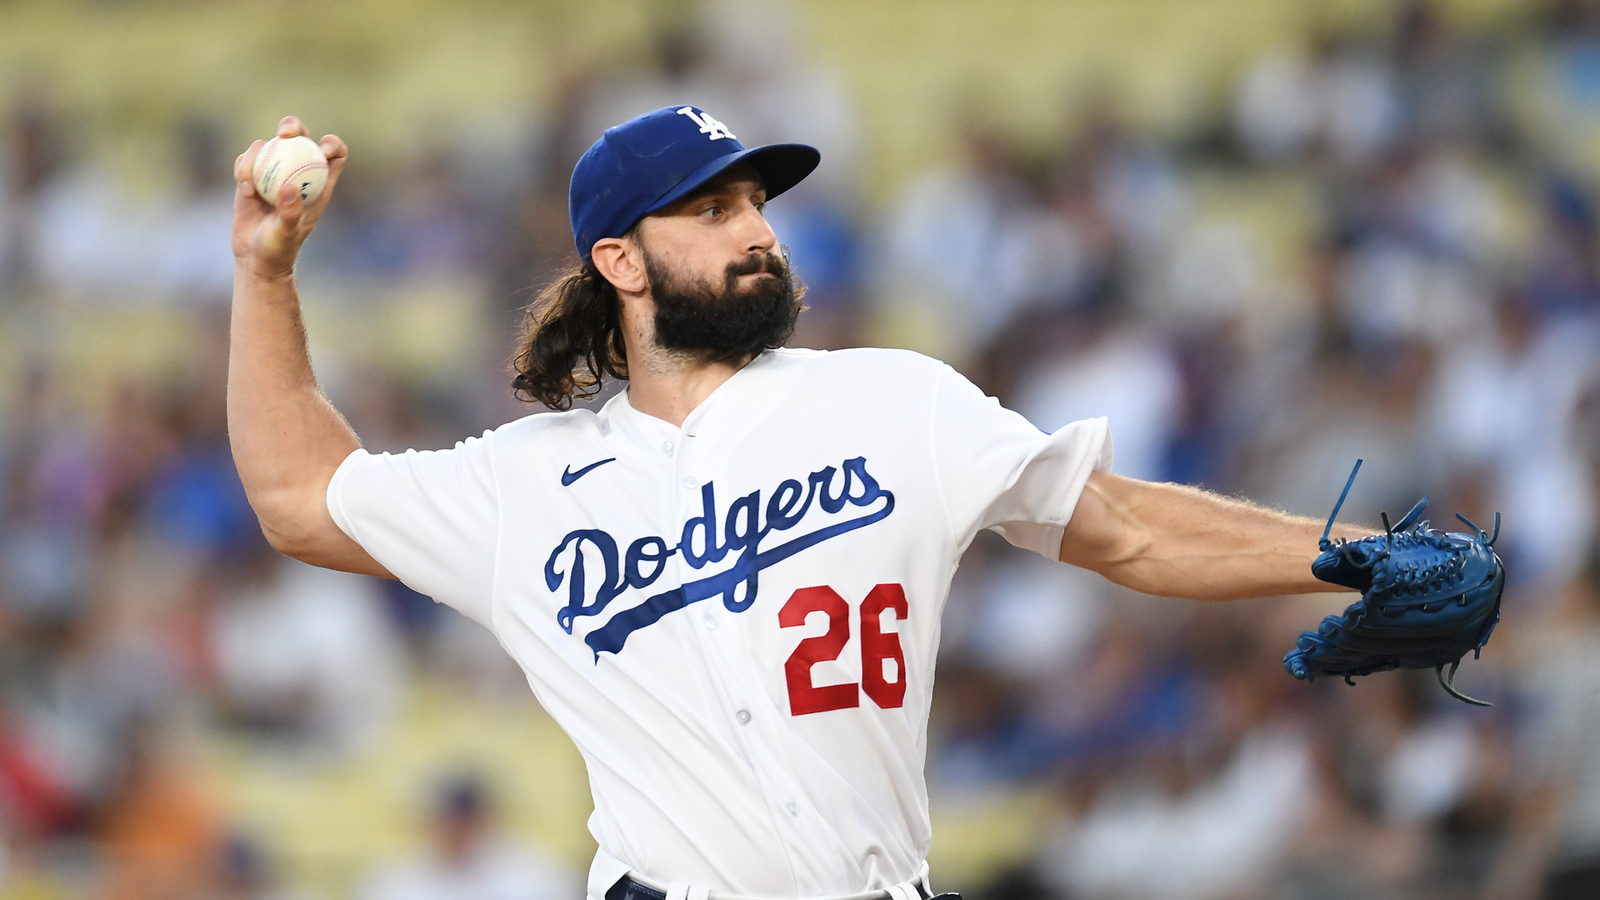 Dodgers starting pitcher unlikely to return this season